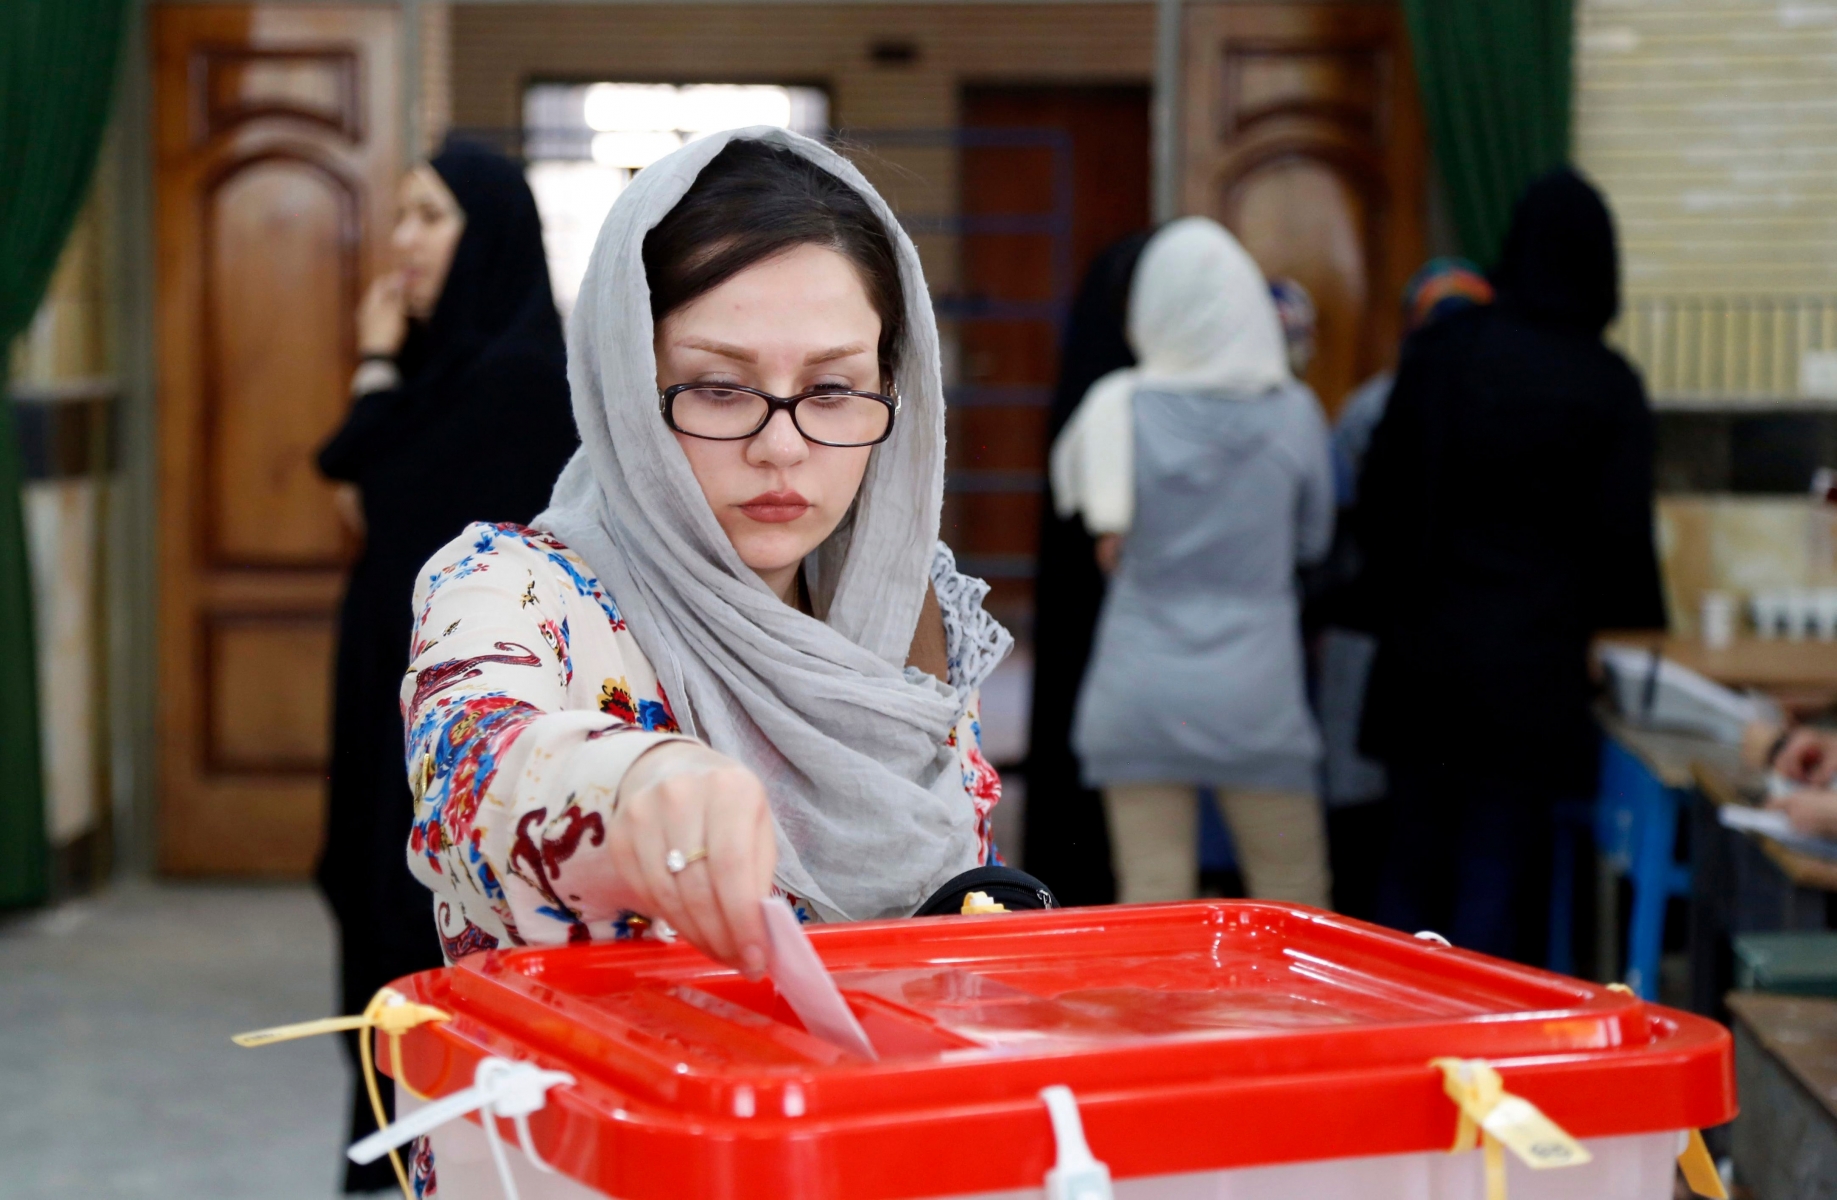 FILE - In this Friday, April 29, 2016 file photo, an Iranian woman casts her ballot for the parliamentary runoff elections in a polling station at the city of Qods about 12 miles (20 kilometers) west of the capital Tehran, Iran. Iranian state TV says that the moderate-reformist bloc has secured more than 20 more seats in parliamentary runoff elections, bringing the bloc closer to a majority in the next legislature. State TV on Saturday, April 30, announced winners for 45 of the remaining 68 seats being contested. (AP Photo, File) Iran